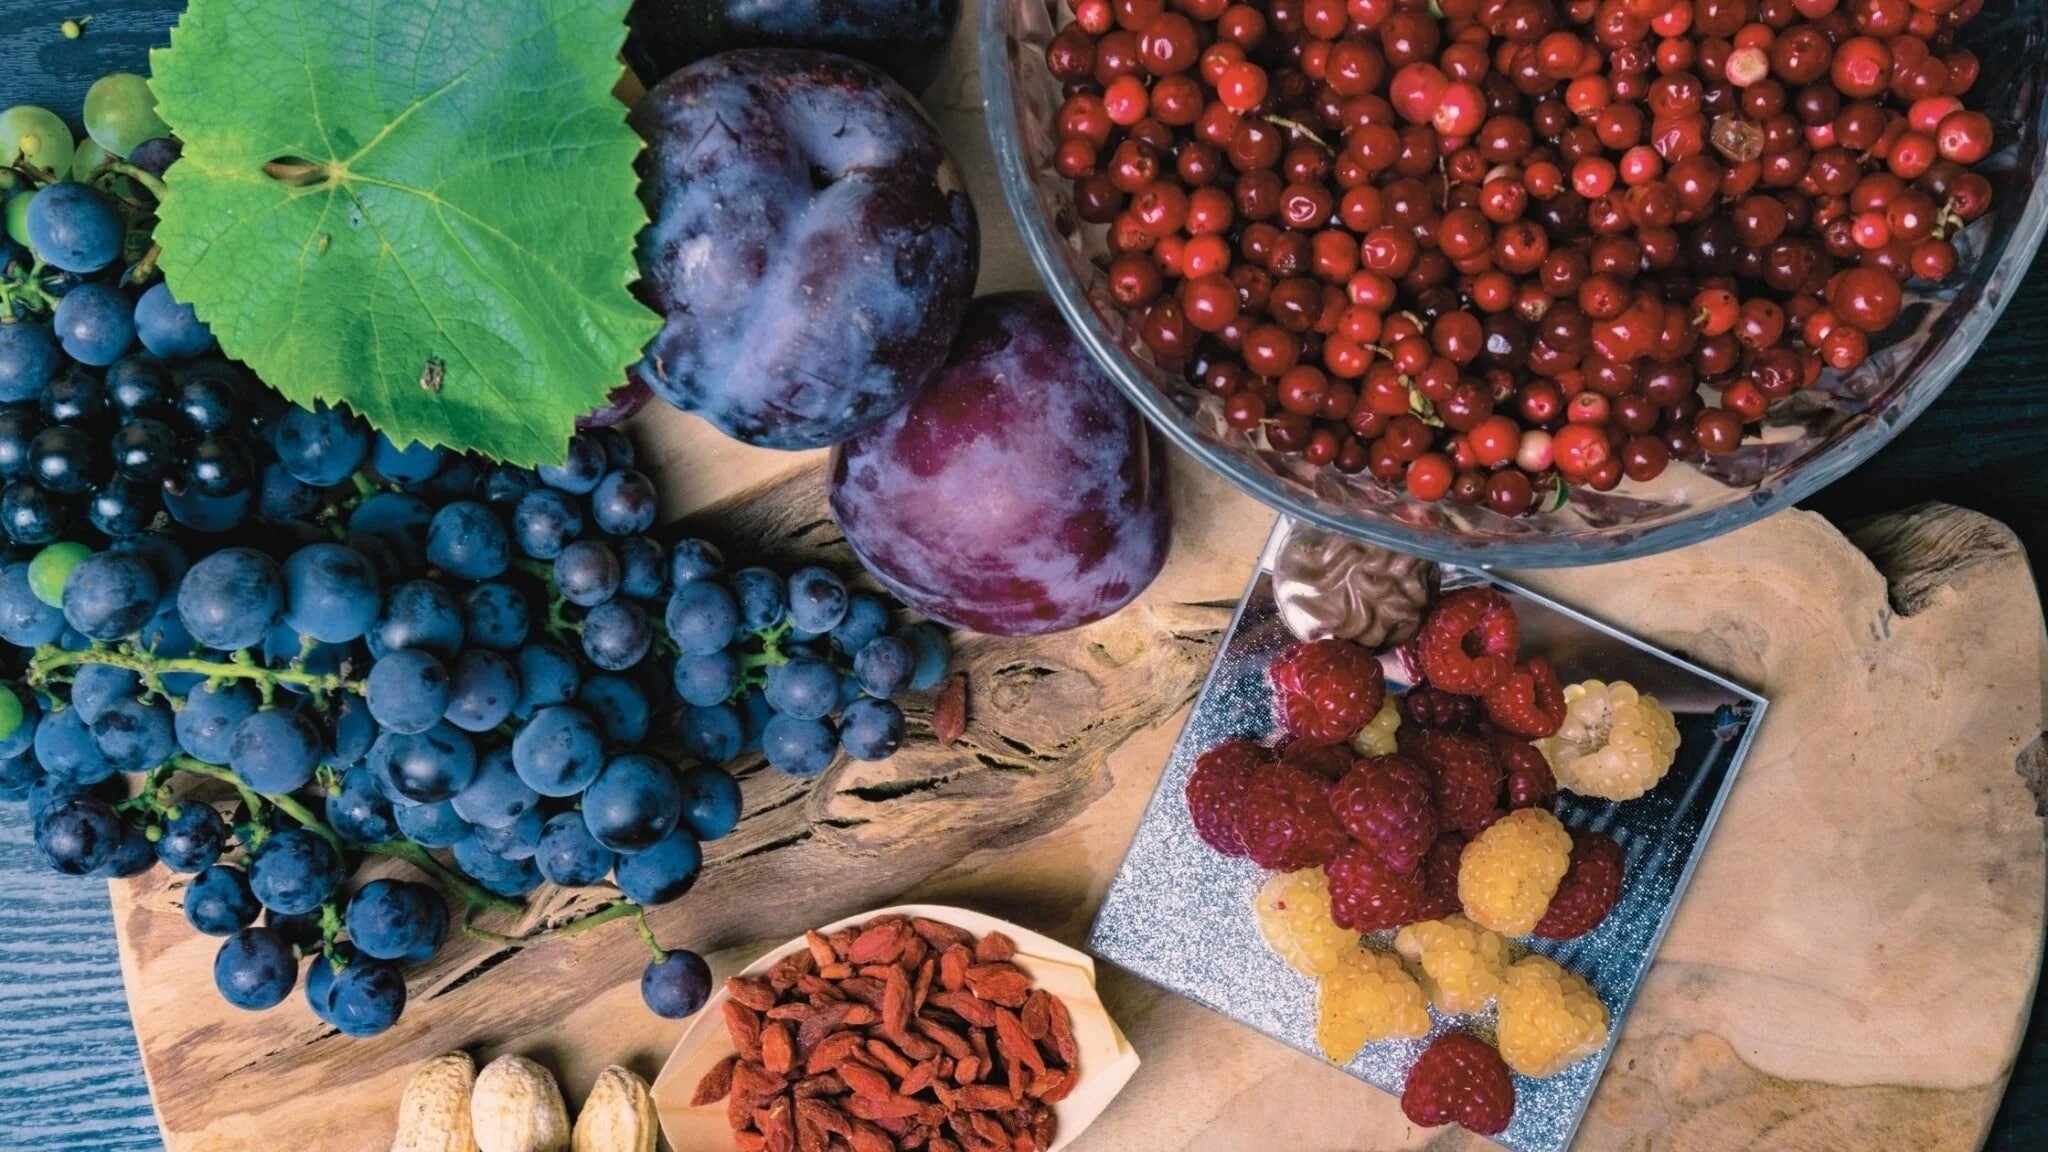 Assortment of colorful berries and fruits rich in resveratrol, including grapes, plums, cranberries, raspberries, and goji berries arranged on a wooden surface